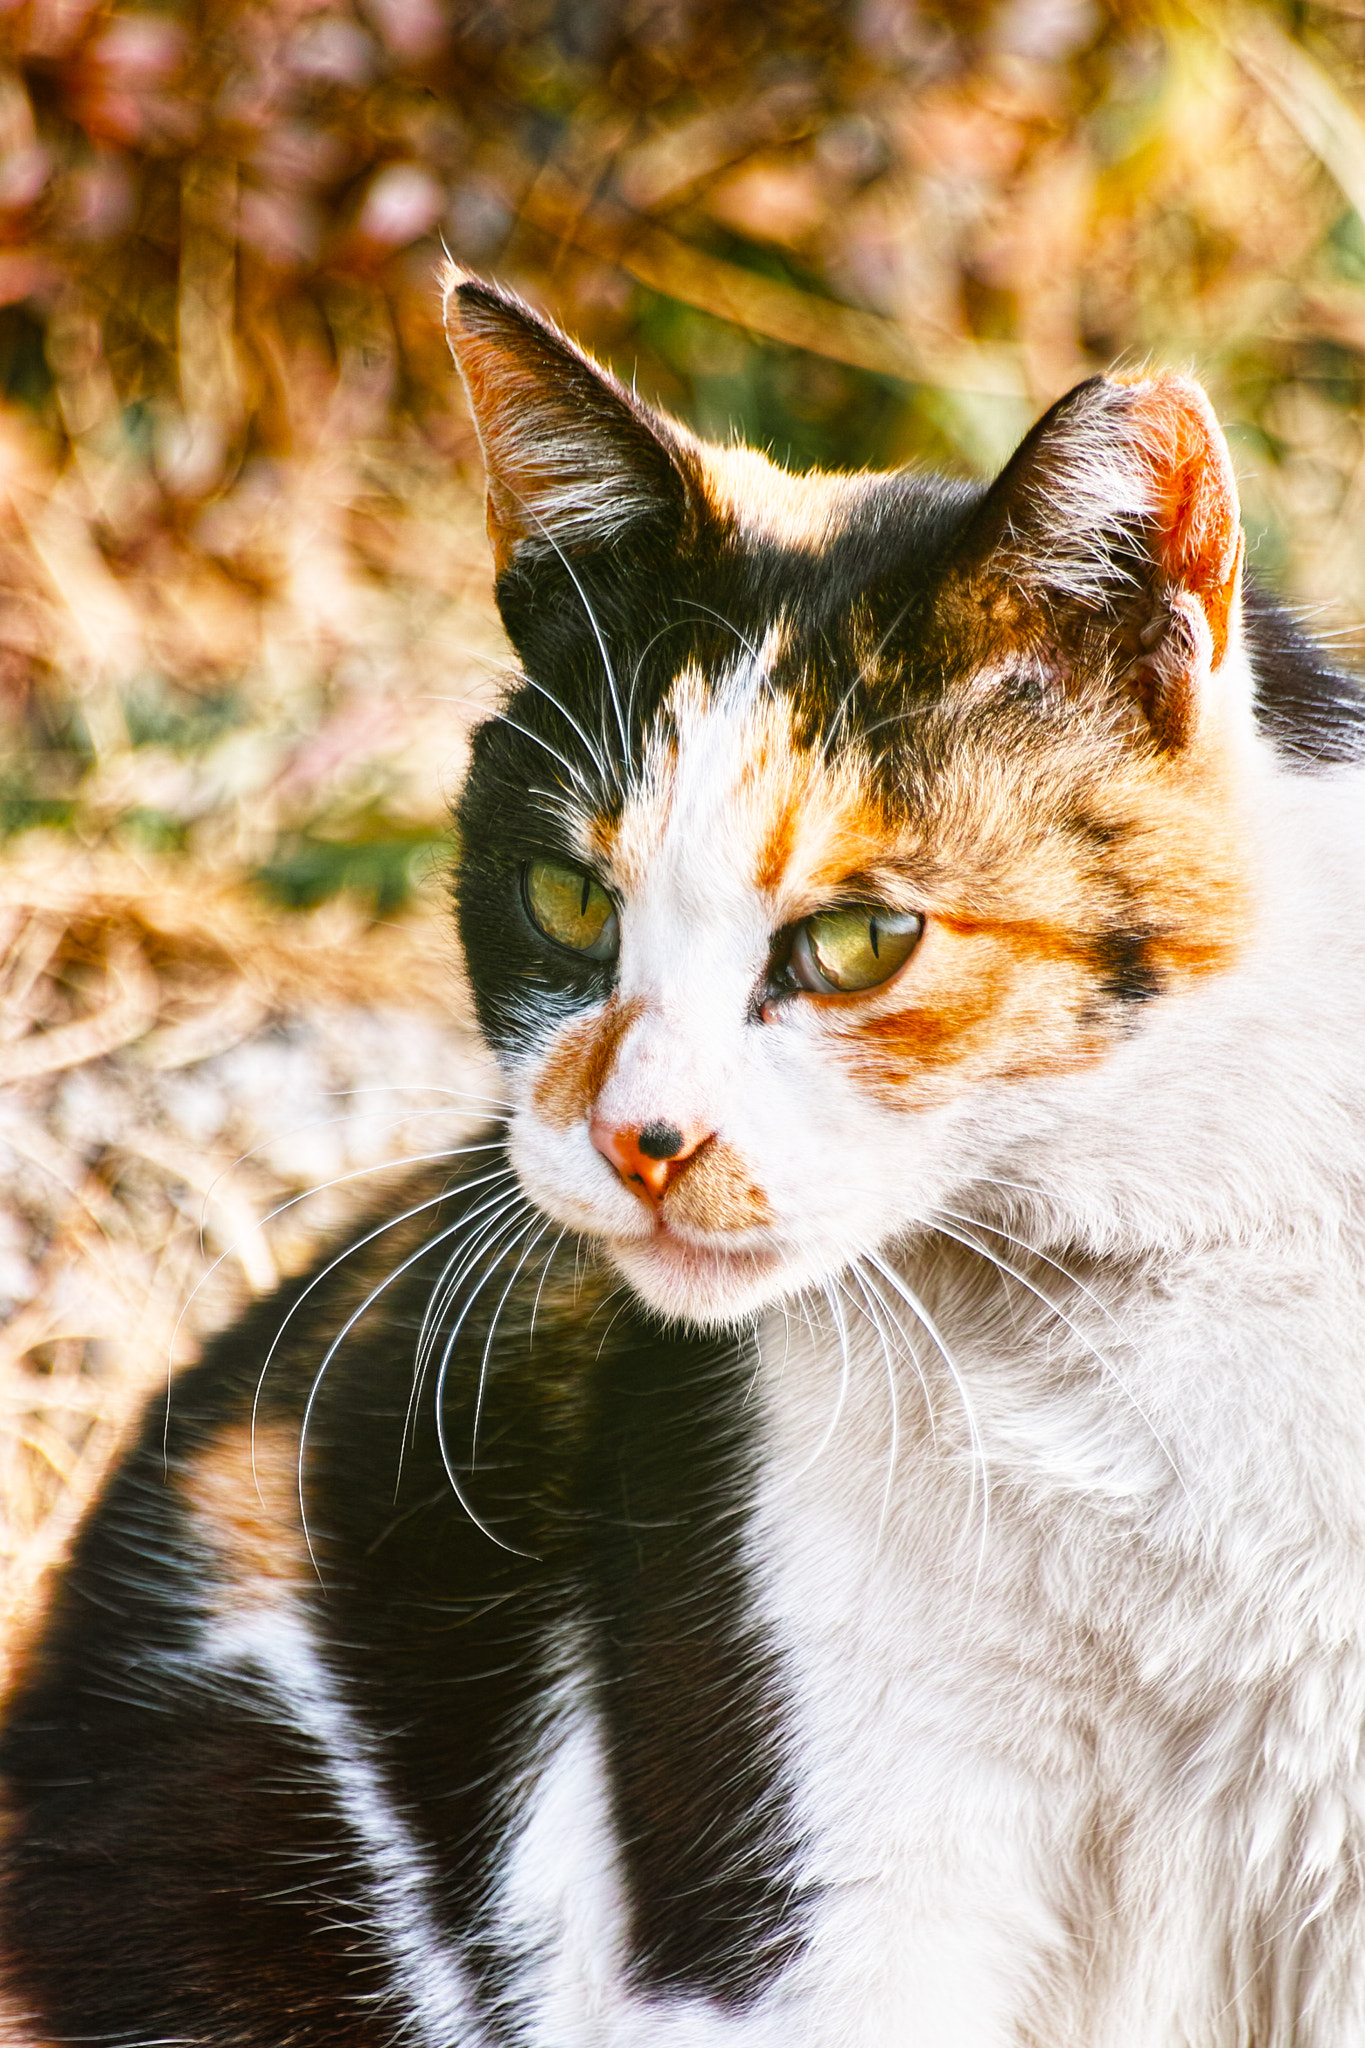 Sigma SD1 Merrill sample photo. Cat every day photography